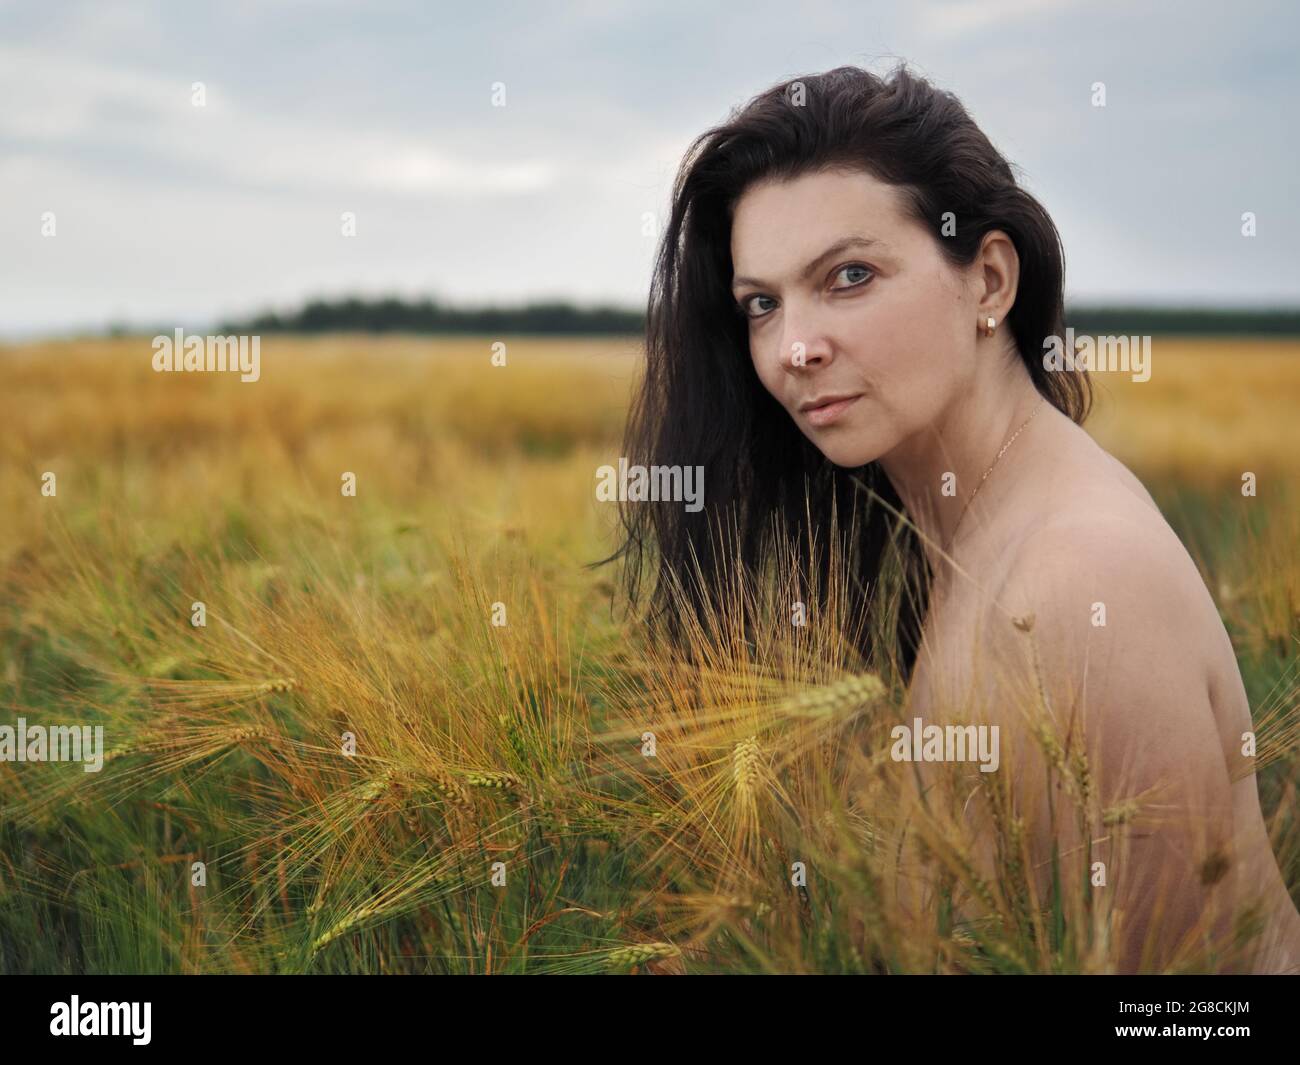 Portrait of young pretty woman without bra in barley field Stock Photo